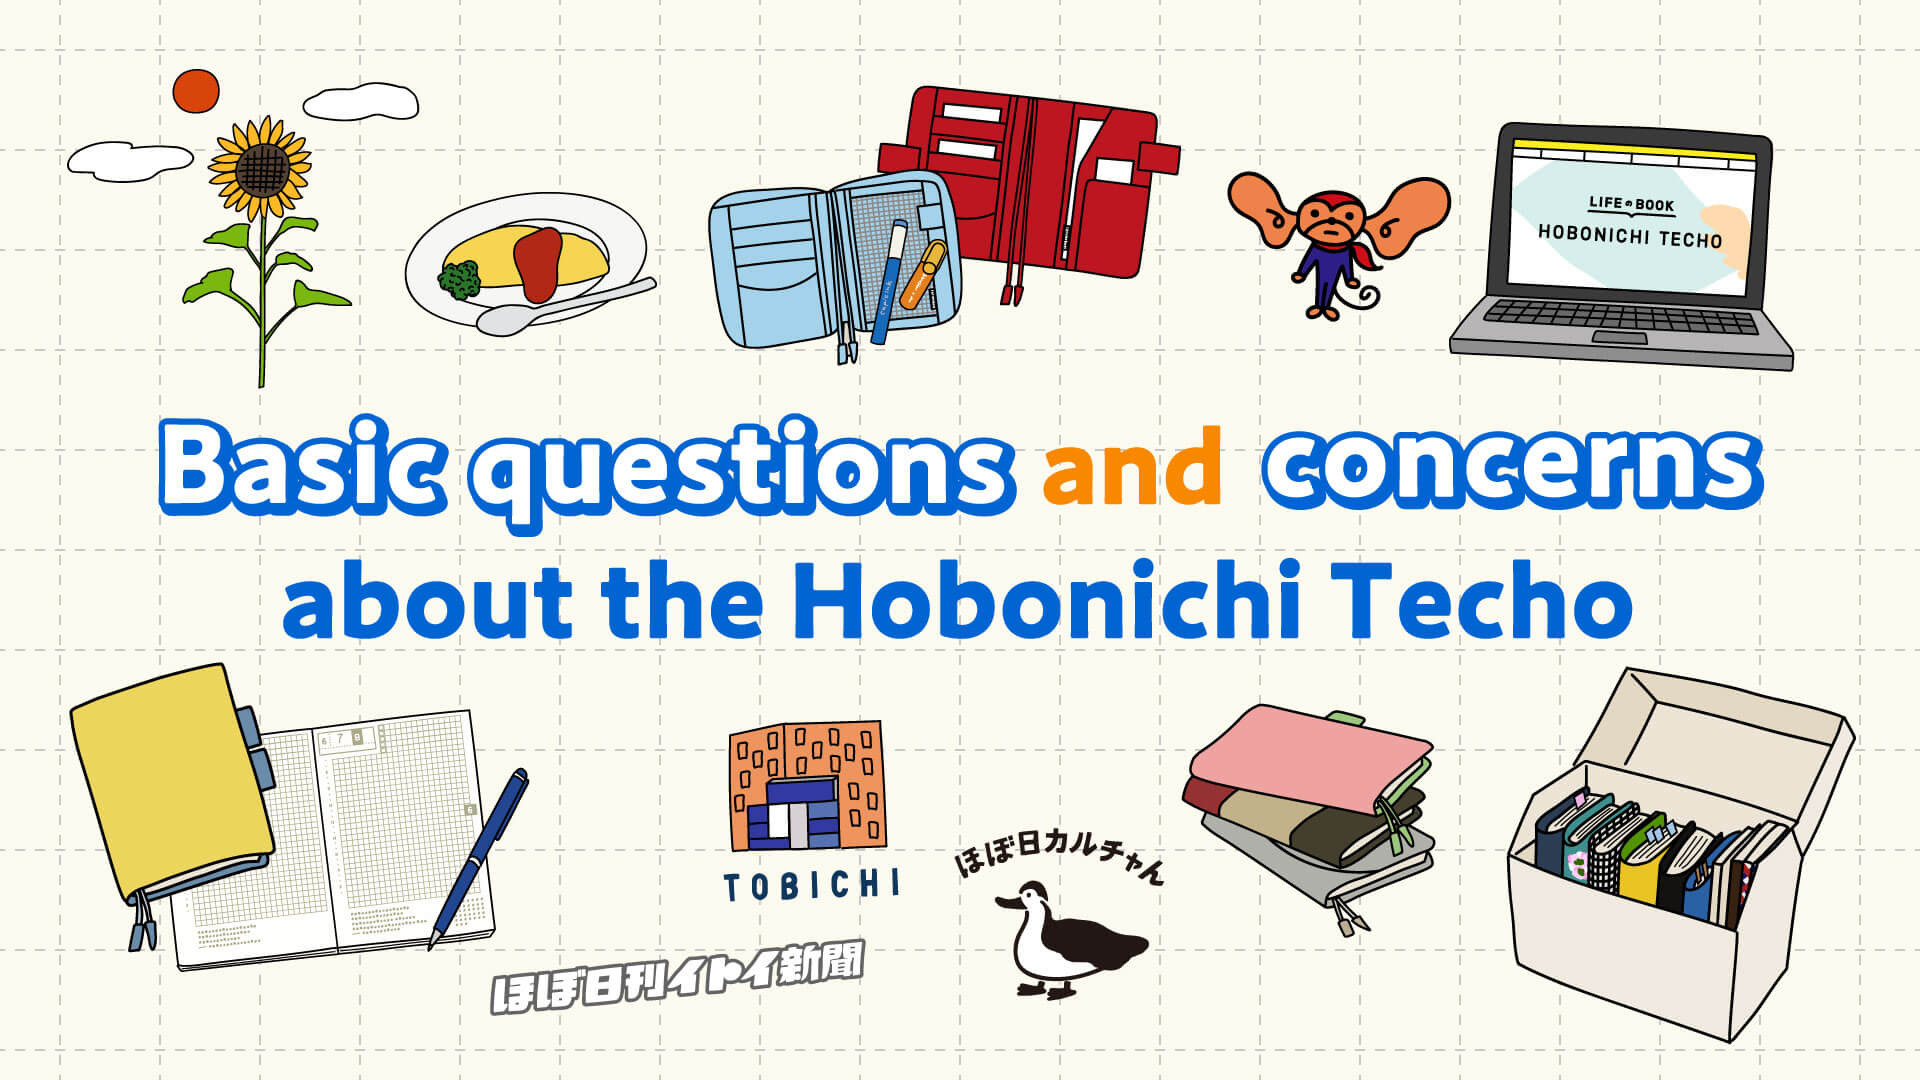 Basic questions and concerns about the Hobonichi Techo